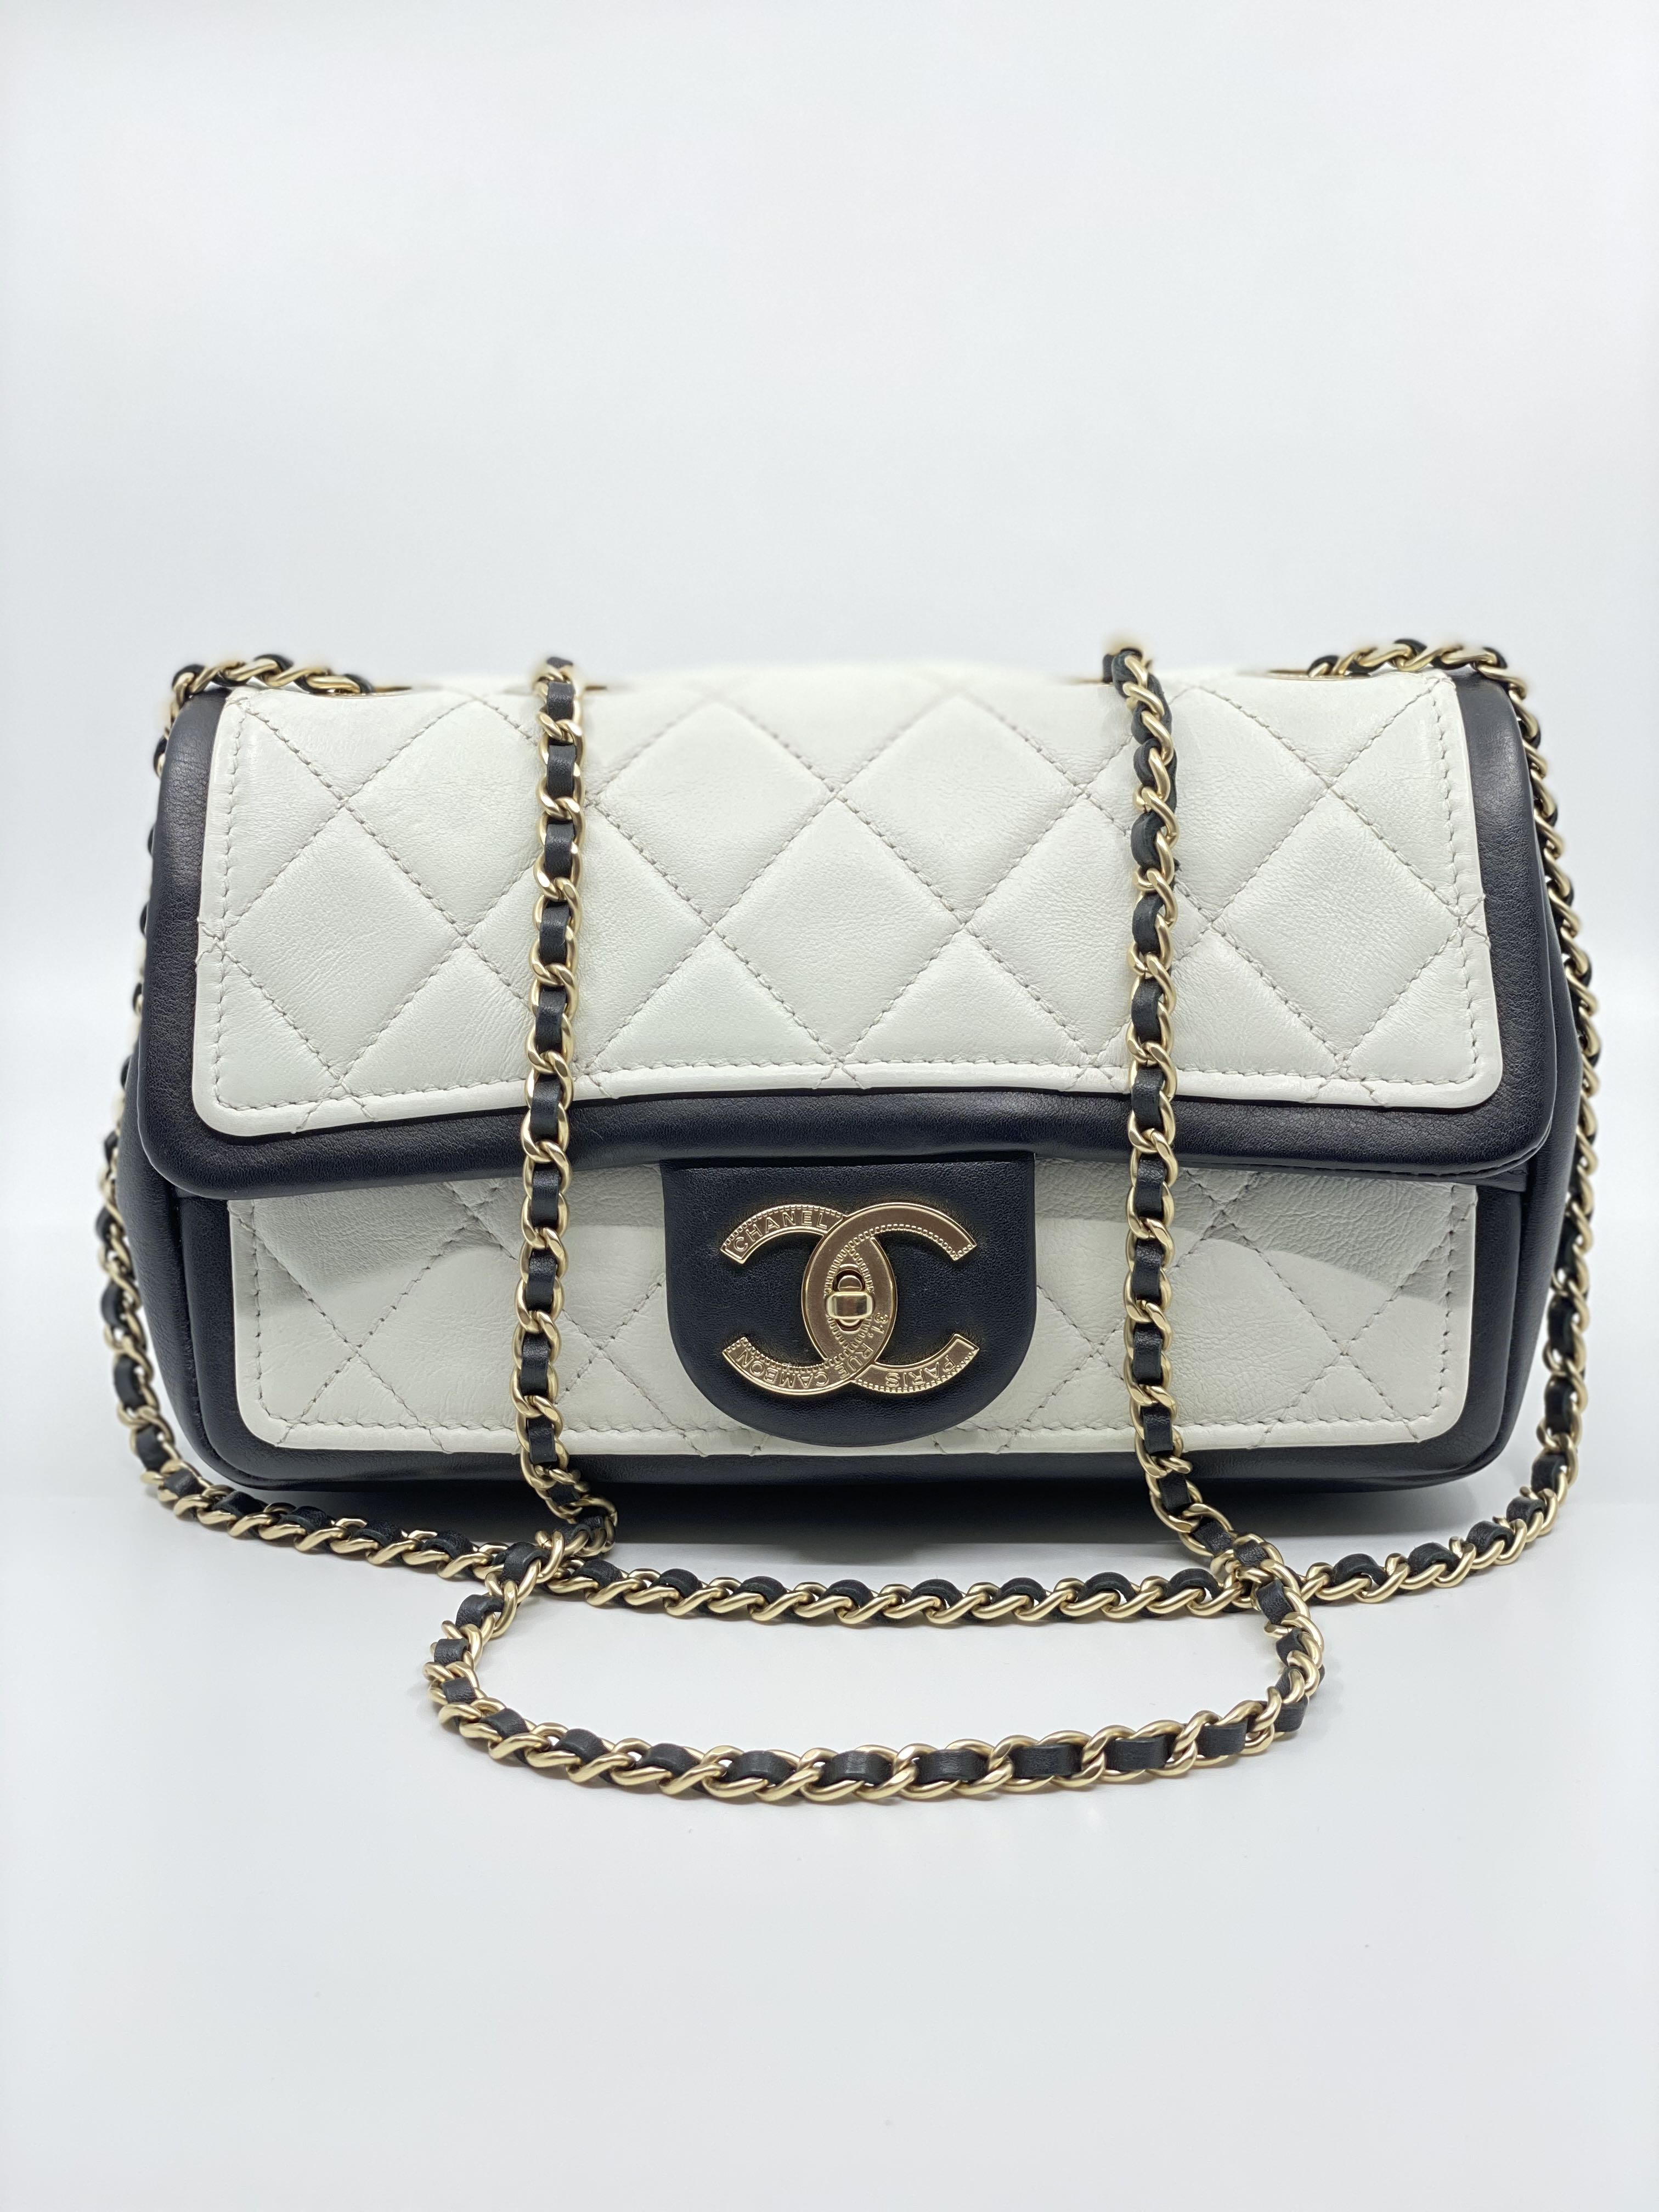 Chanel Graphic Flap Bag Quilted Calfskin Small black and white